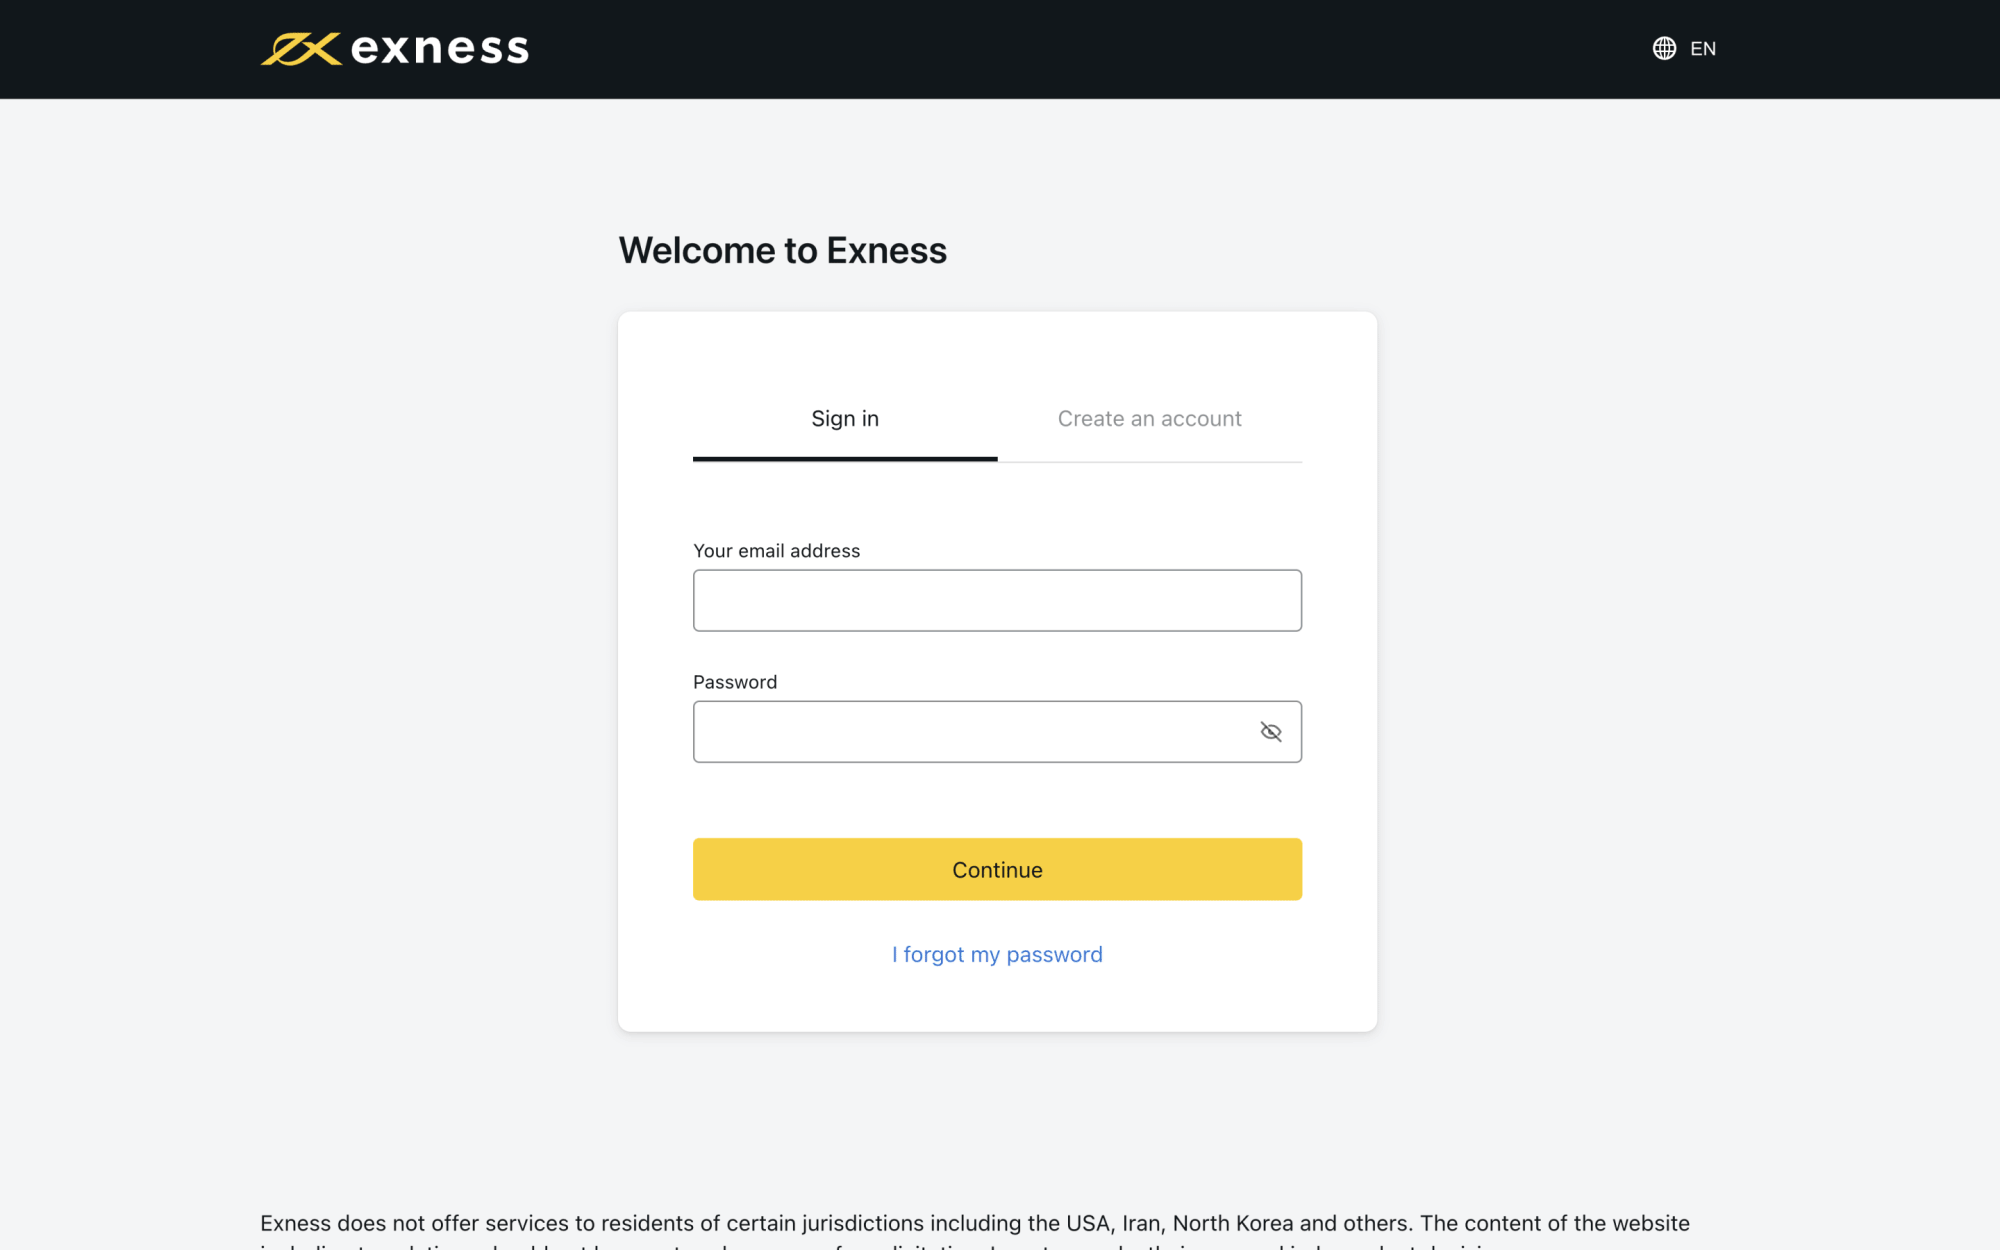 How to Get Started with Exness